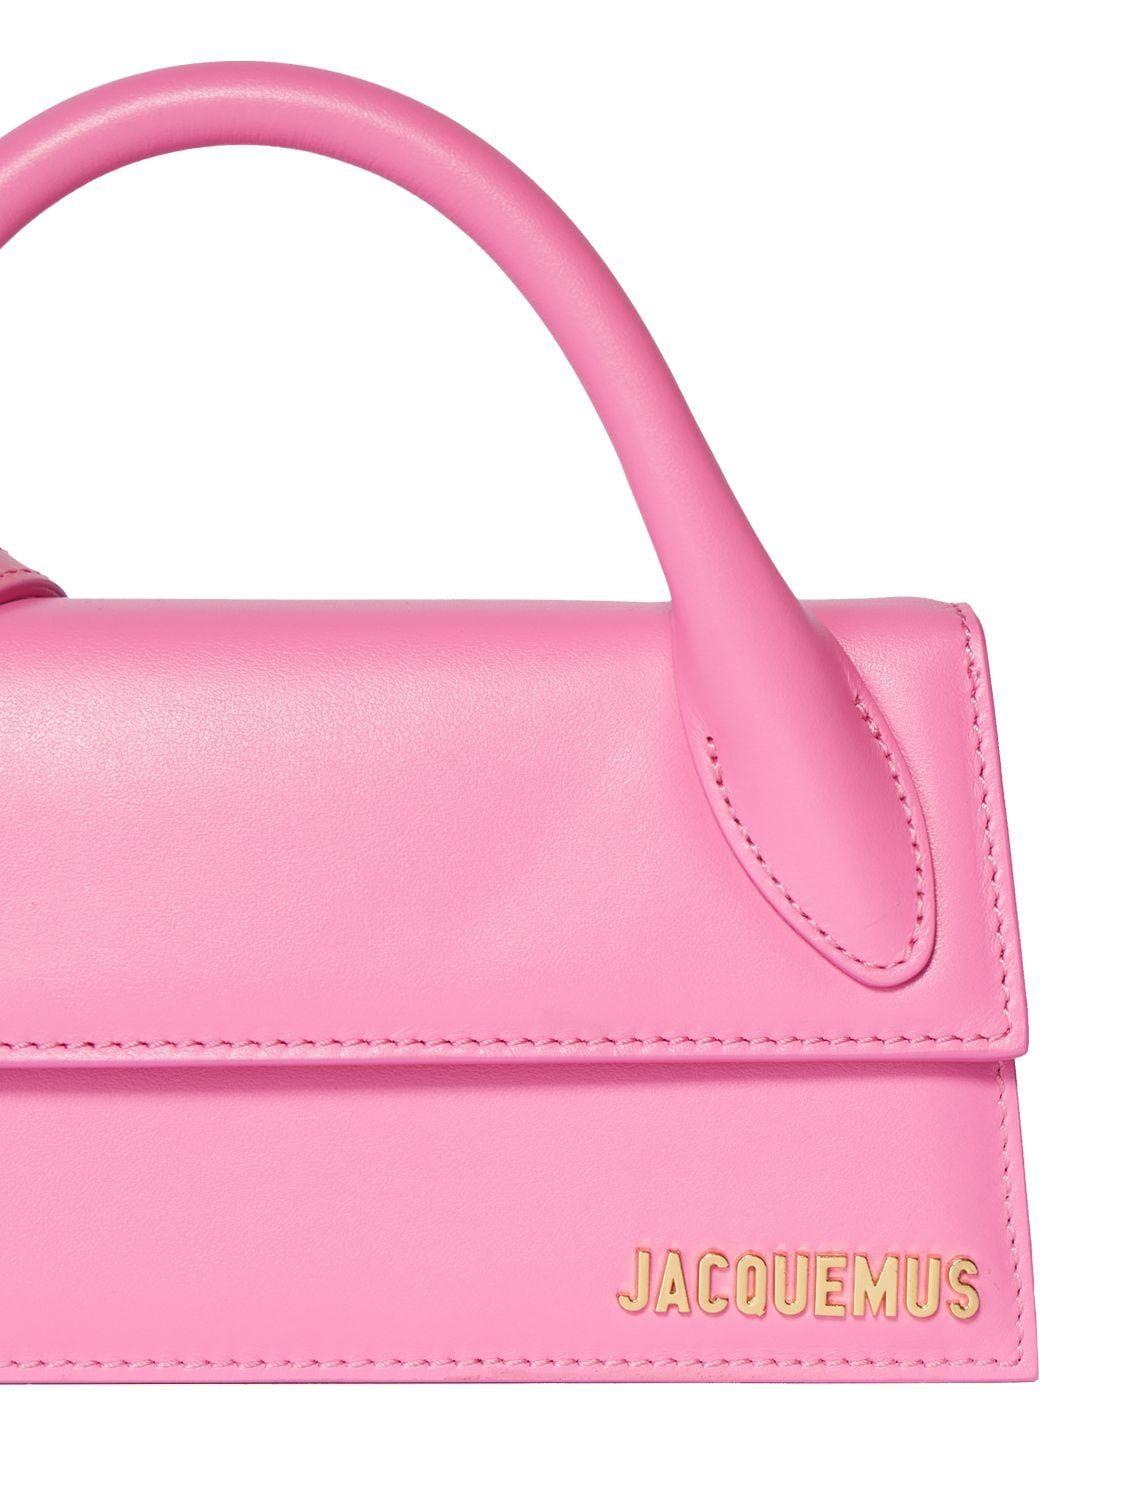 Jacquemus Le Chiquito Long Leather Top Handle Bag in Pink